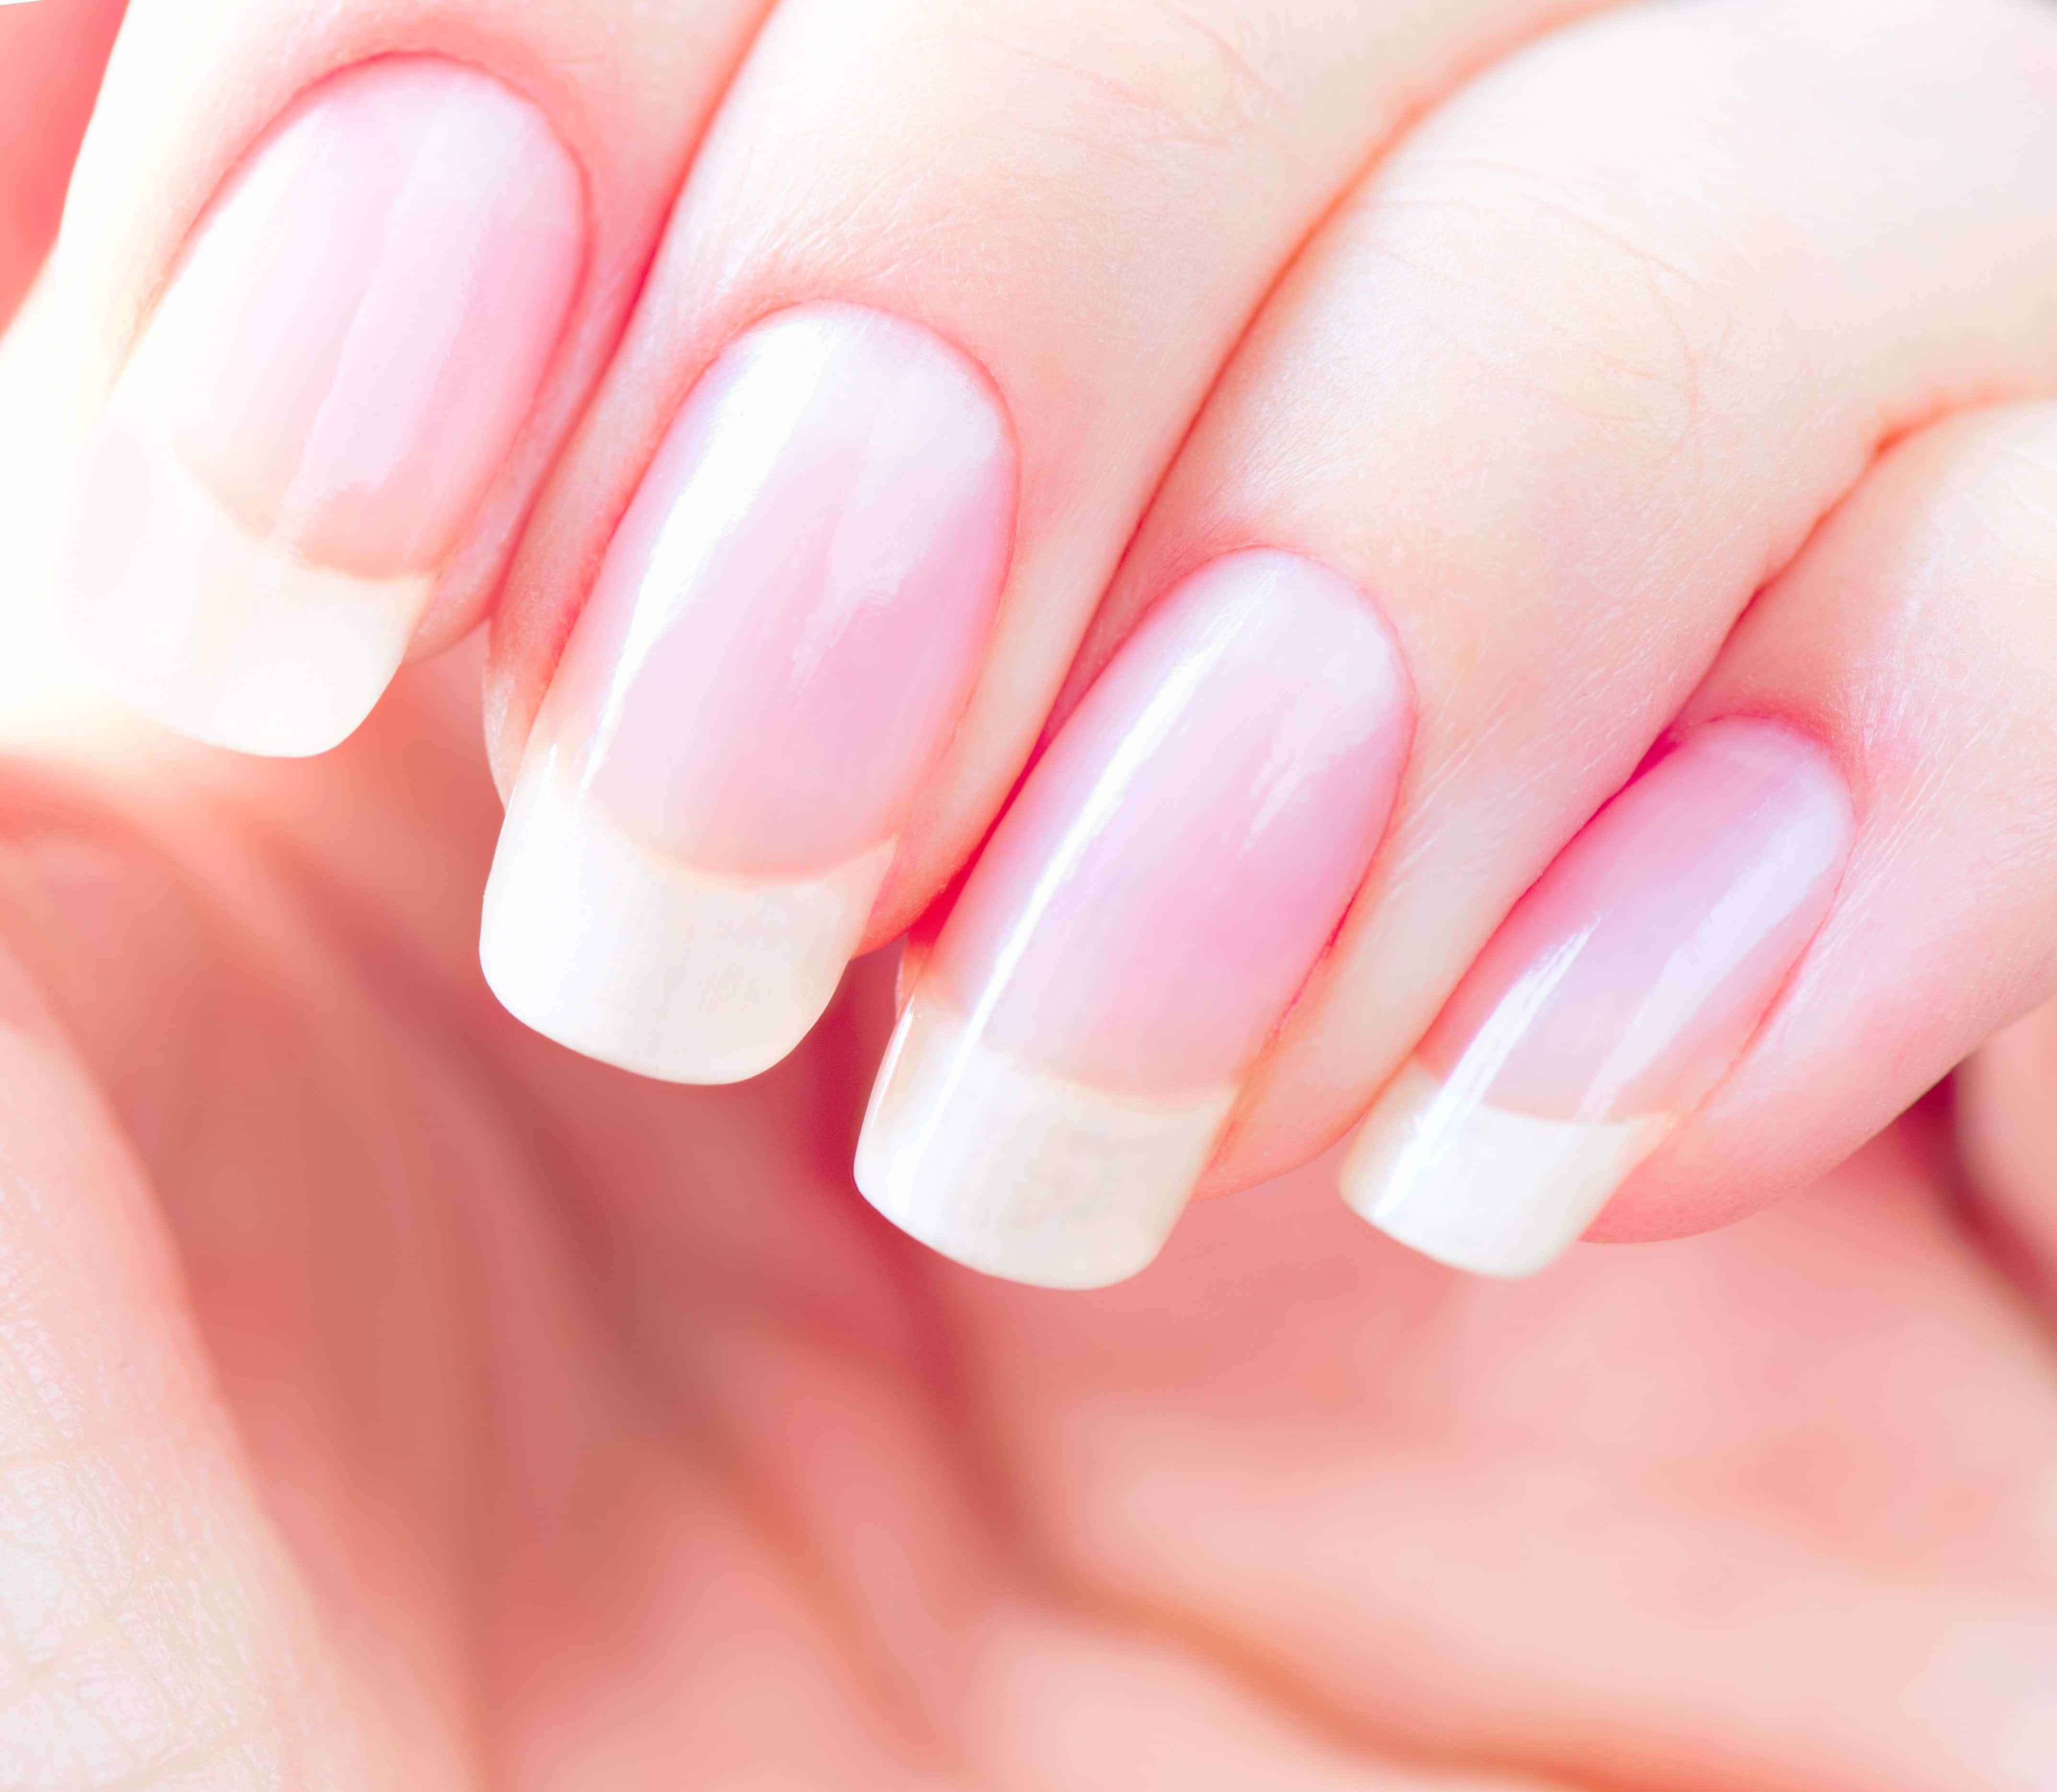 7 Different Nail Shapes to Try in 2023